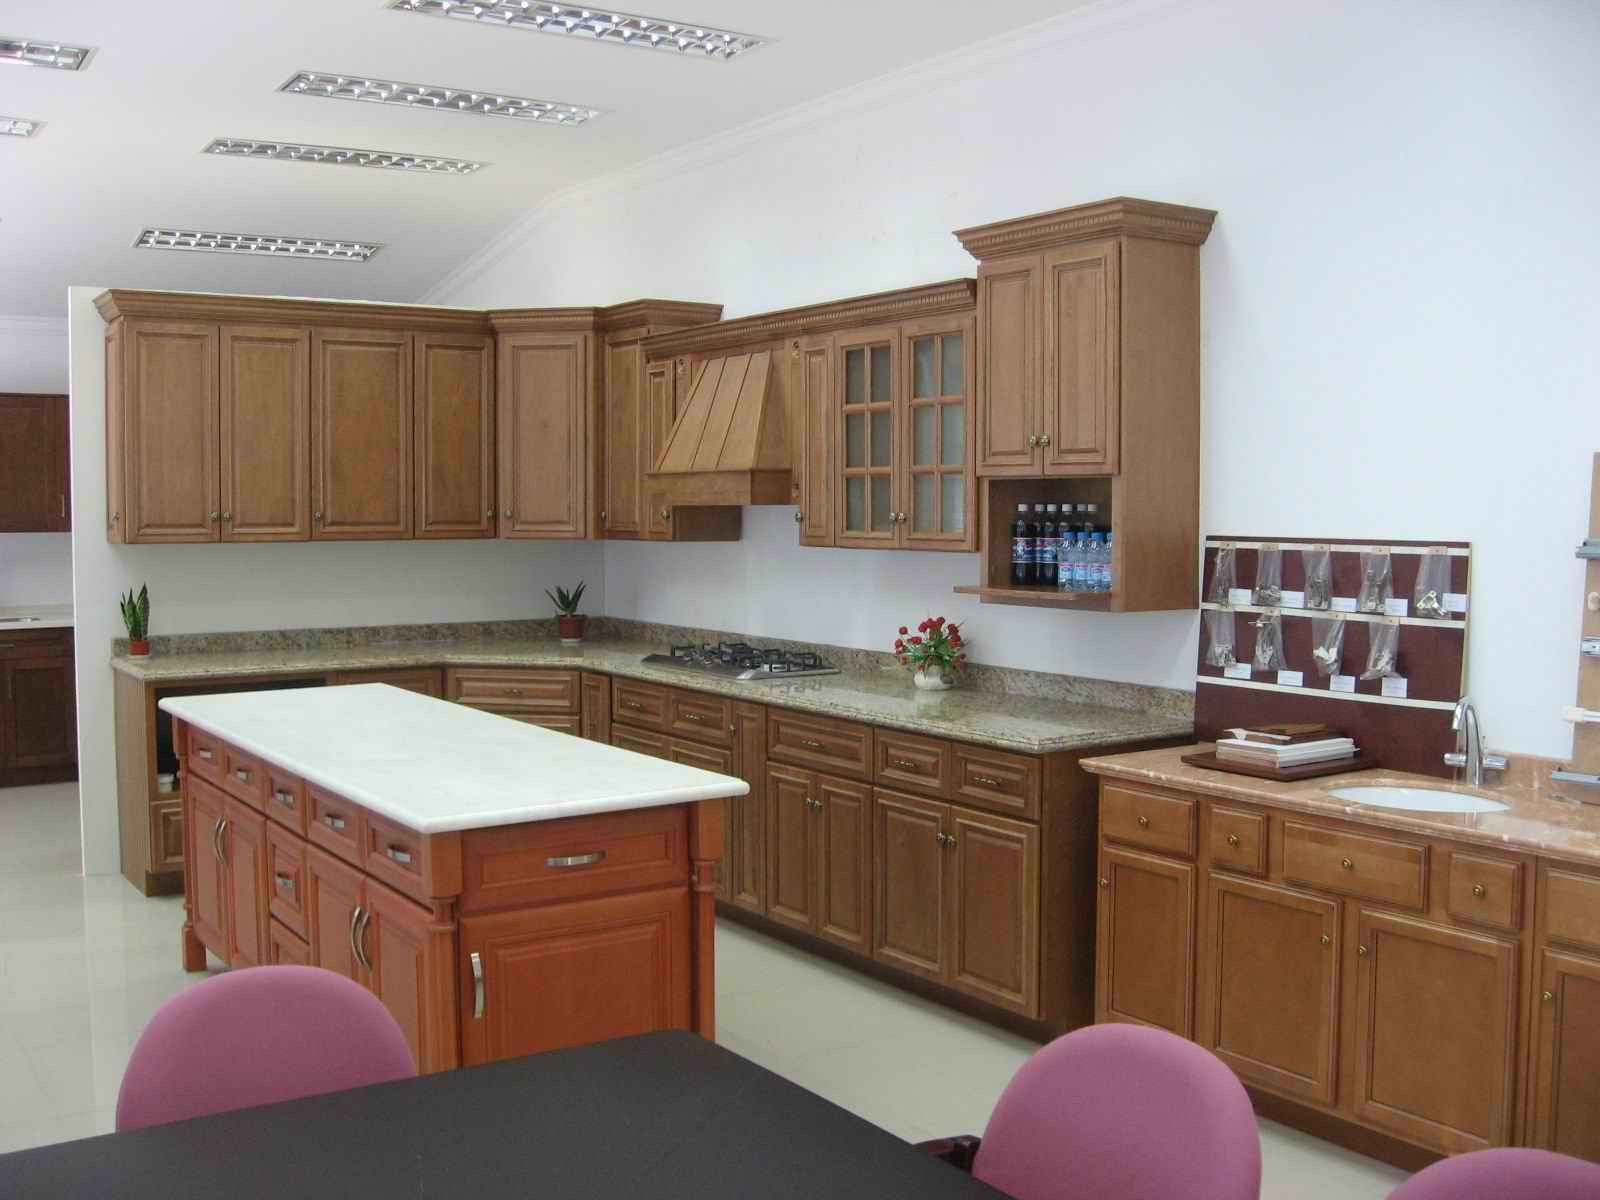 Discount Kitchen Cabinets
 Cheap Cabinets for Kitchens Shopping Tips